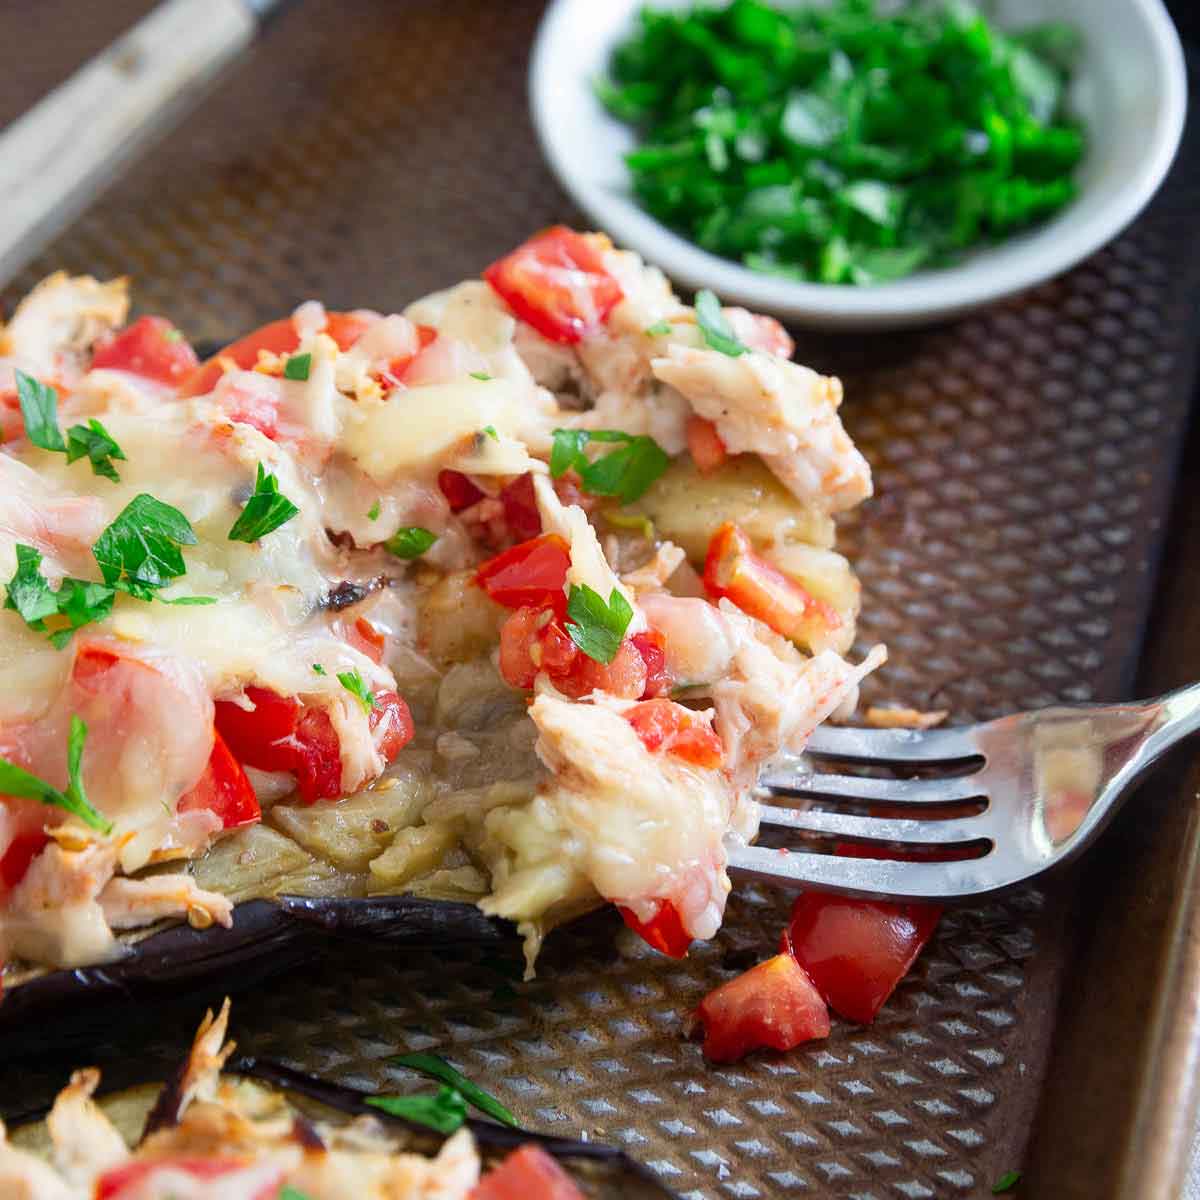 This stuffed eggplant chicken recipe with cheese is full of garlic flavor and perfect for summer.